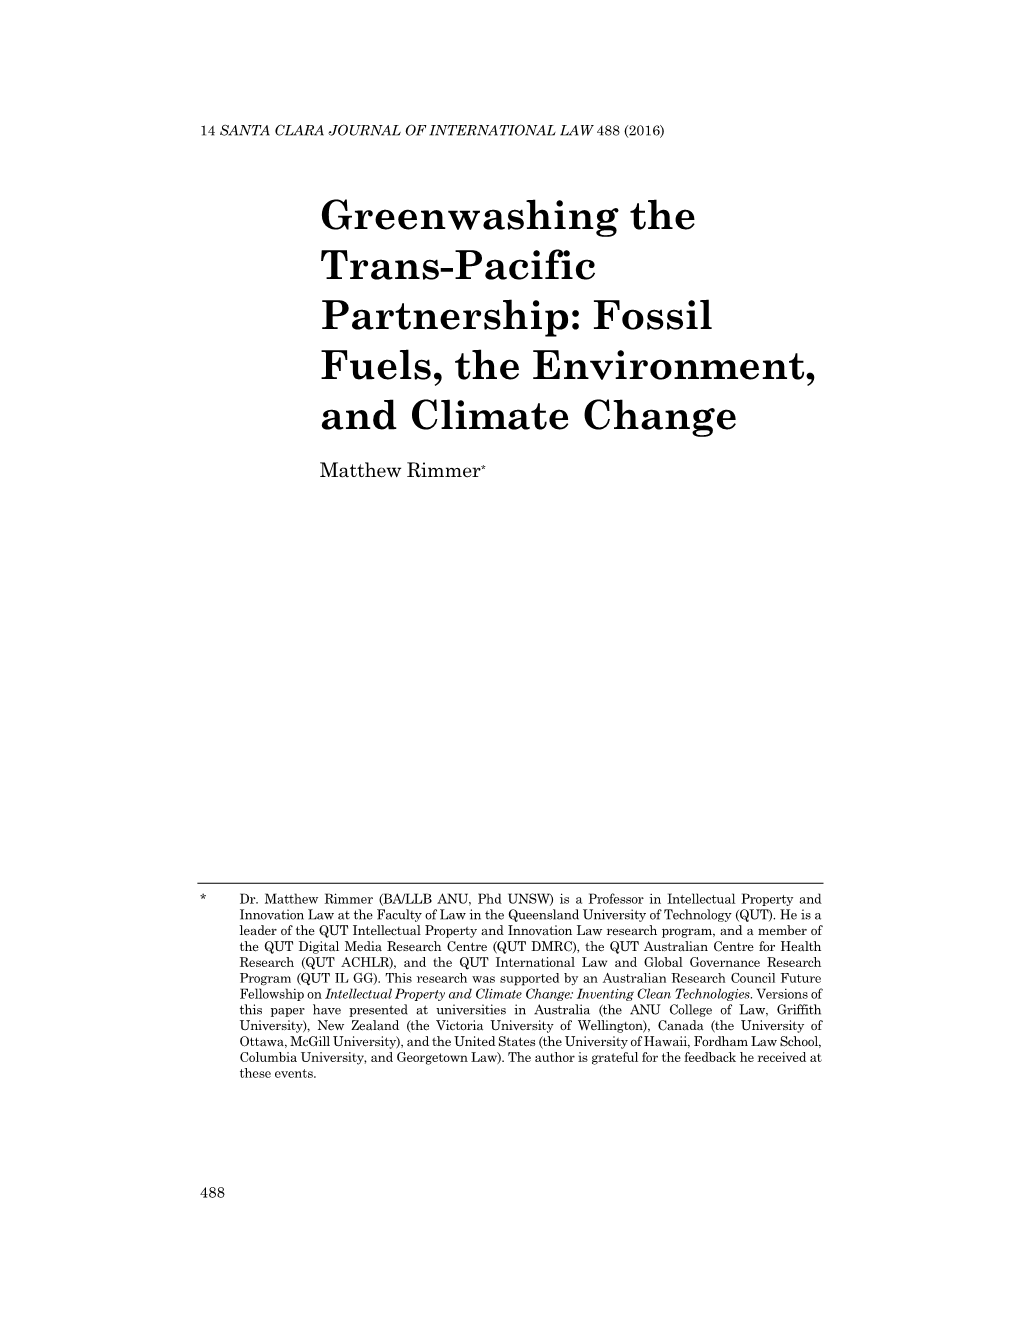 Greenwashing the Trans-Pacific Partnership: Fossil Fuels, the Environment, and Climate Change